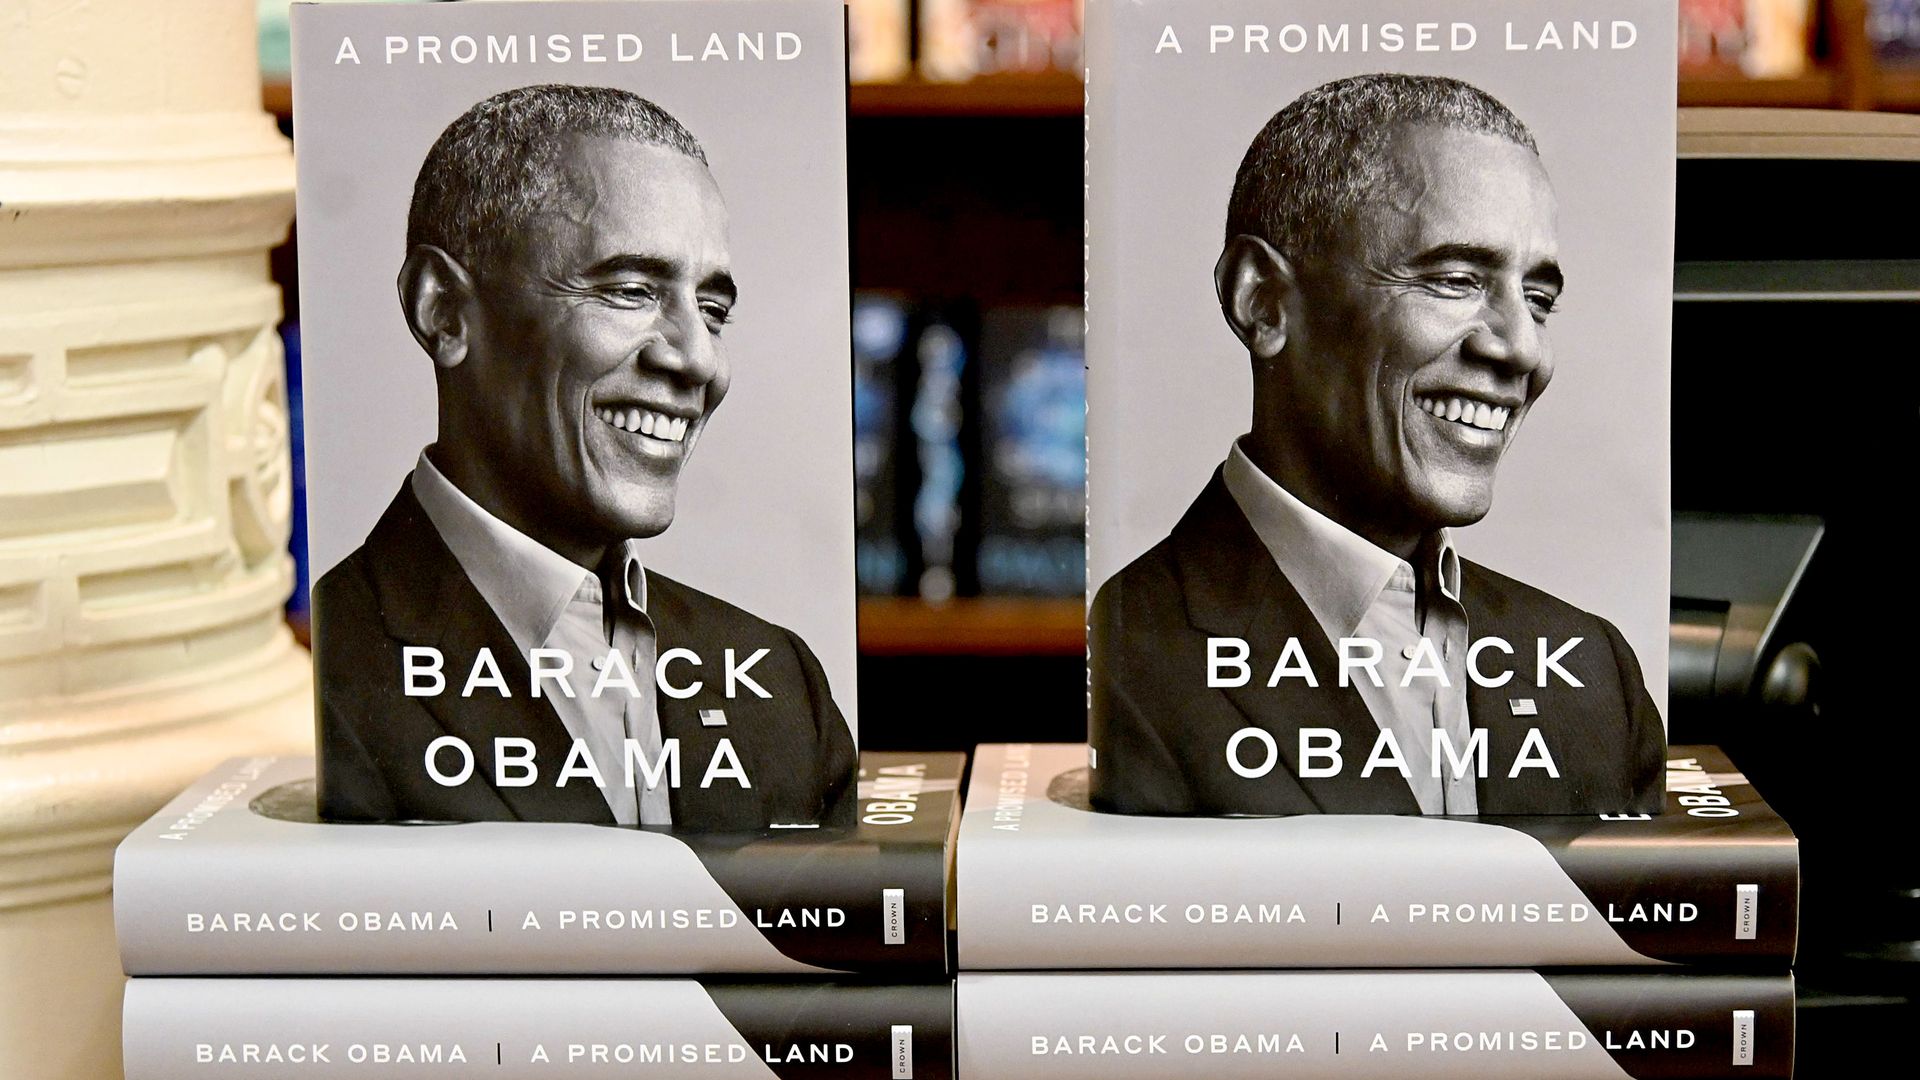 President Barack Obama's memoir "A Promised Land" goes on sale ahead of the holiday season at Barnes & Noble Union Square on November 17, 2020 in New York City